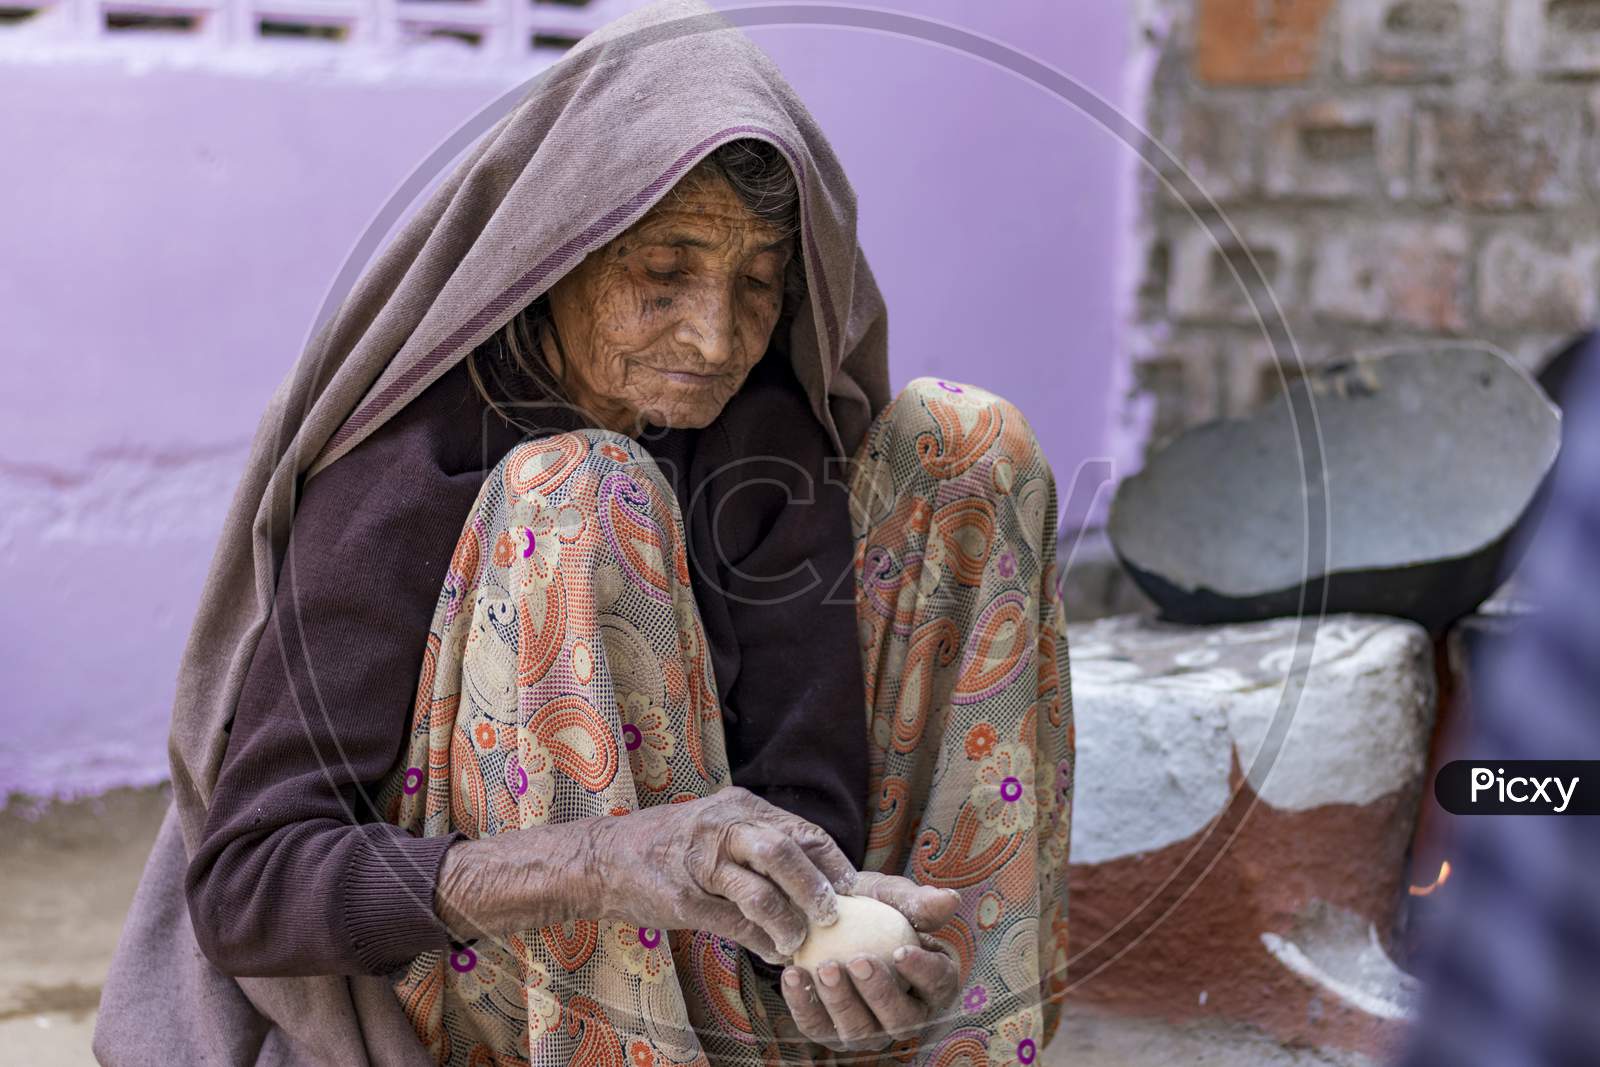 An Indian Old Age Woman Making Food For Family In Rajasthan, India